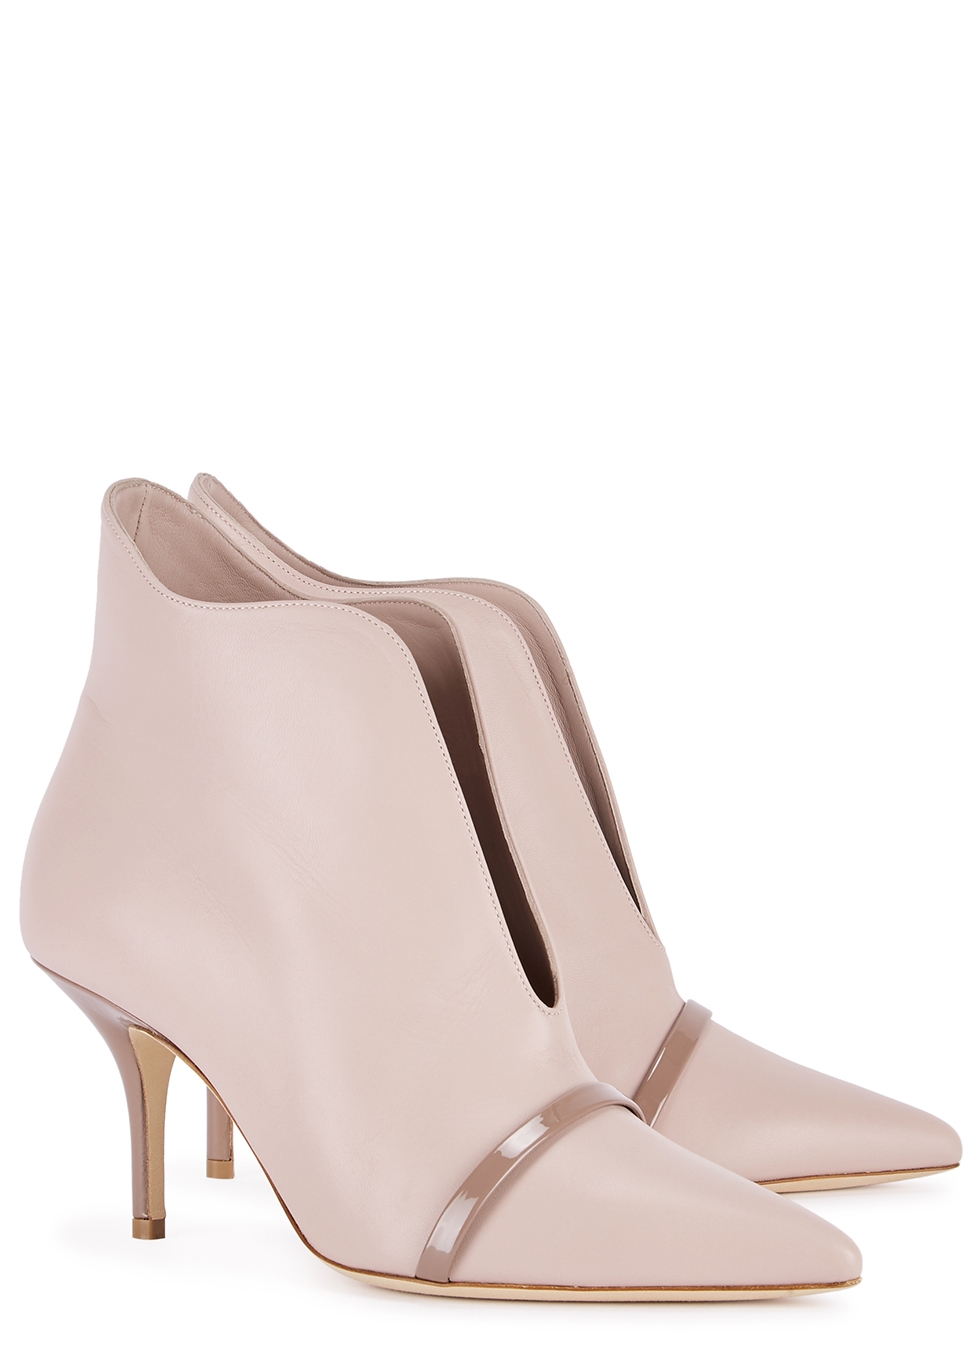 malone souliers ankle boots